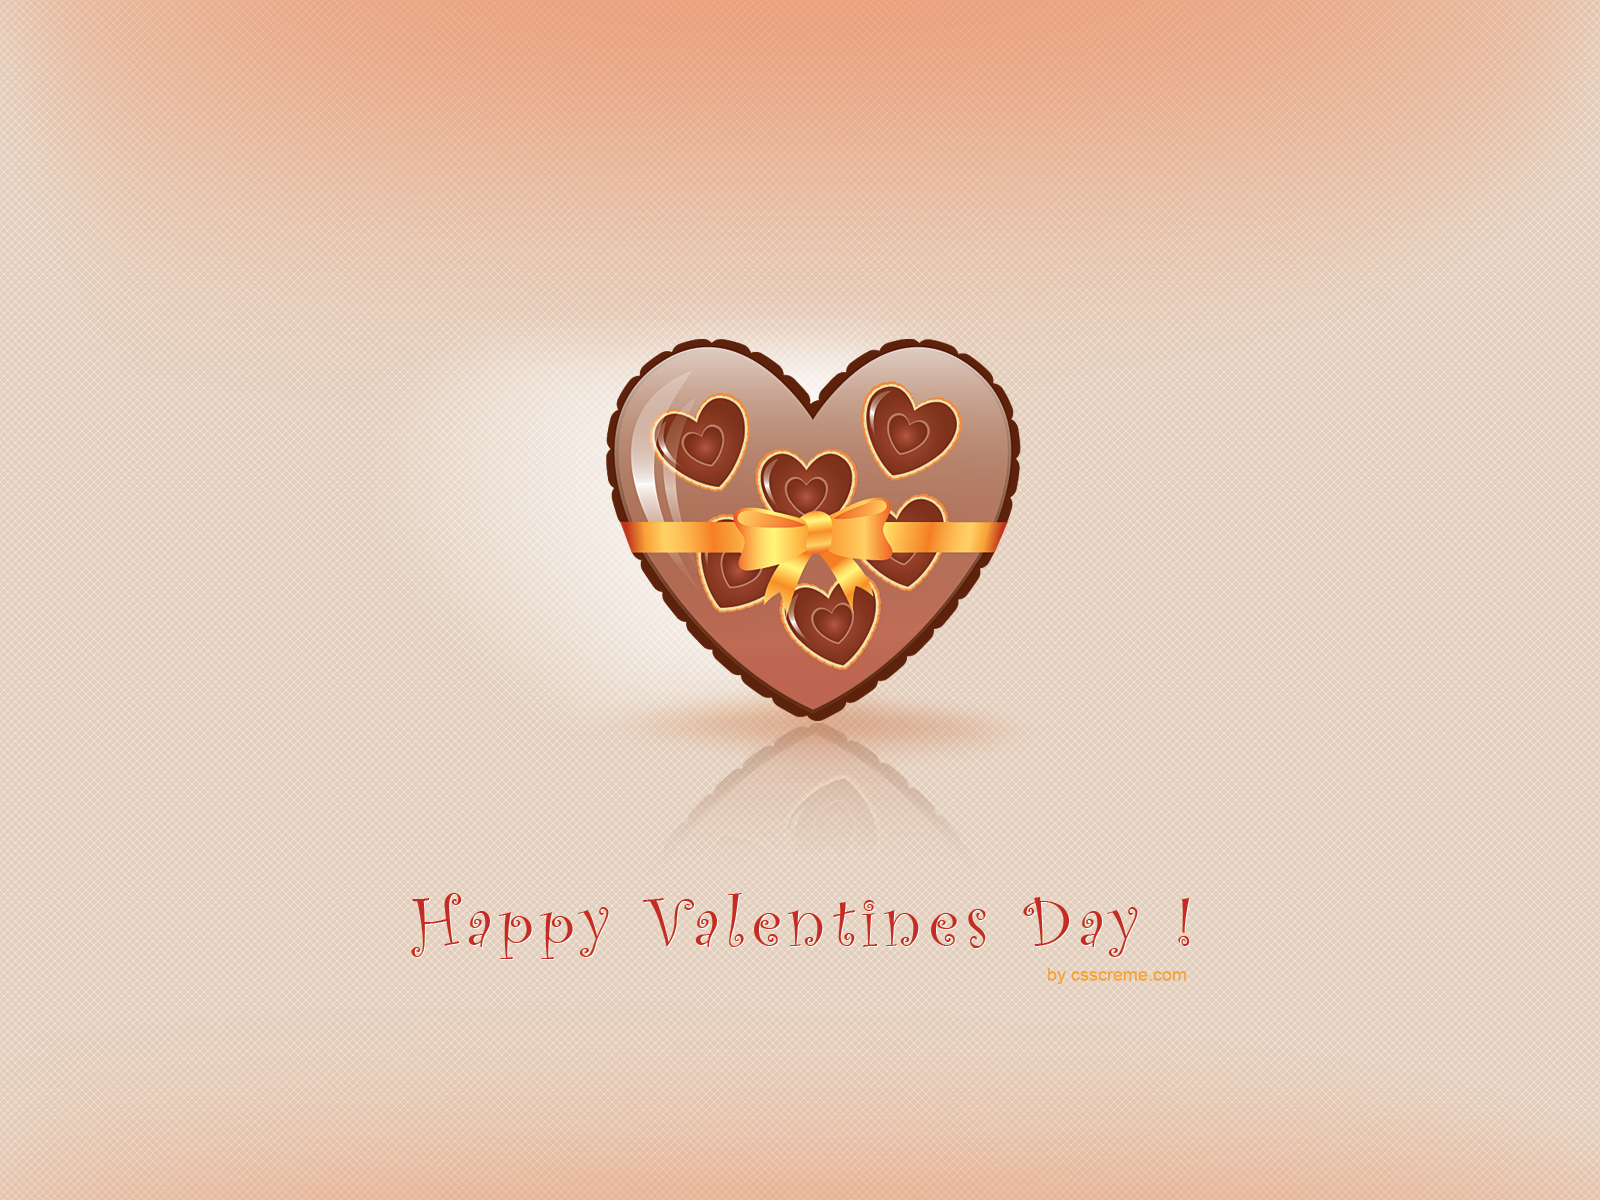 wallpapers holiday, valentine's day, box, candy, heart shaped, ribbon